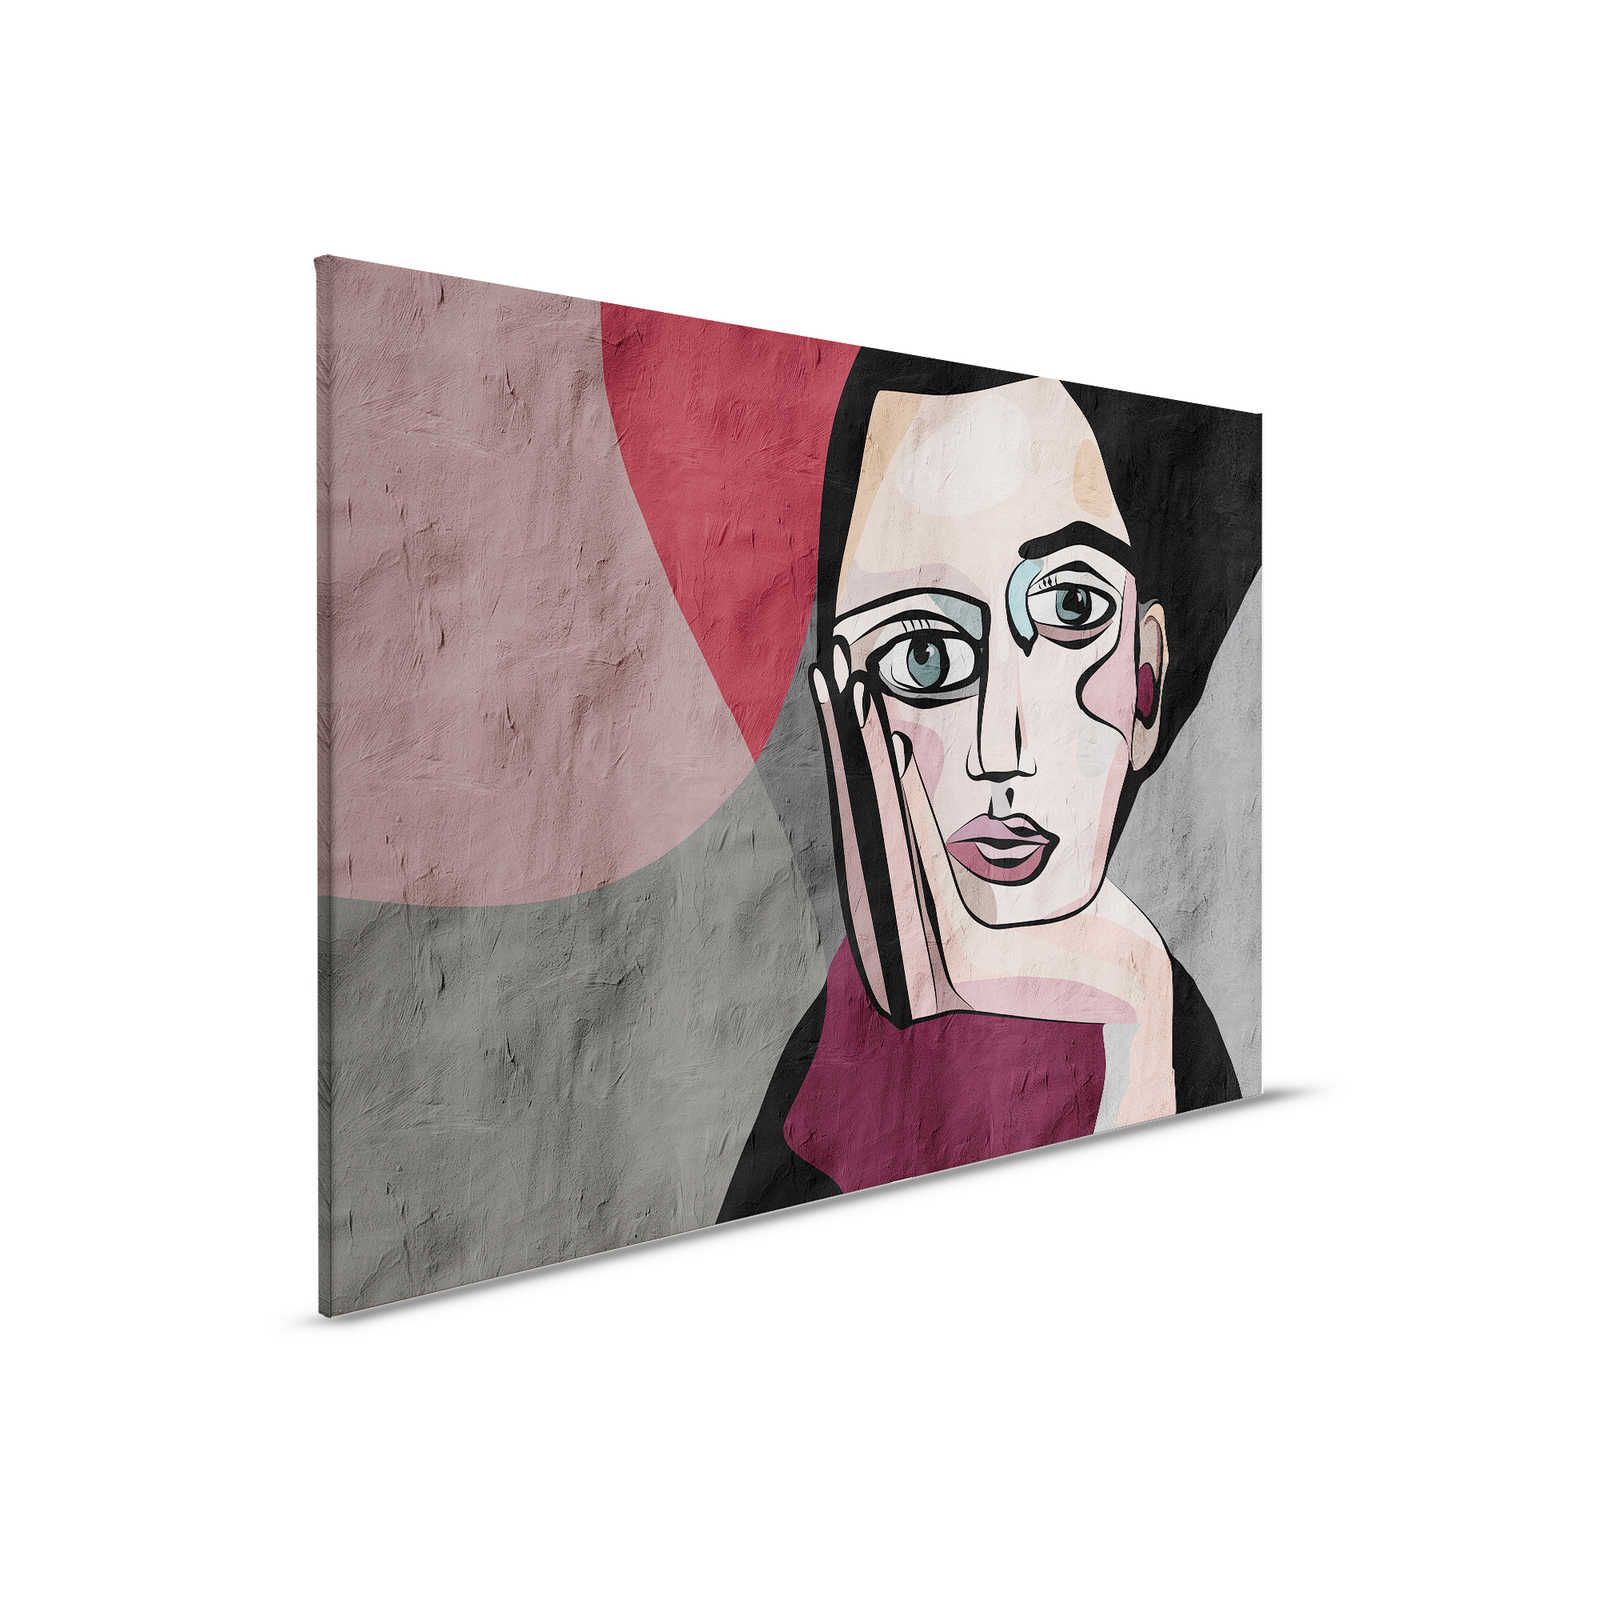         Think Tank 1 - Canvas painting abstract graffiti women face - 0,90 m x 0,60 m
    